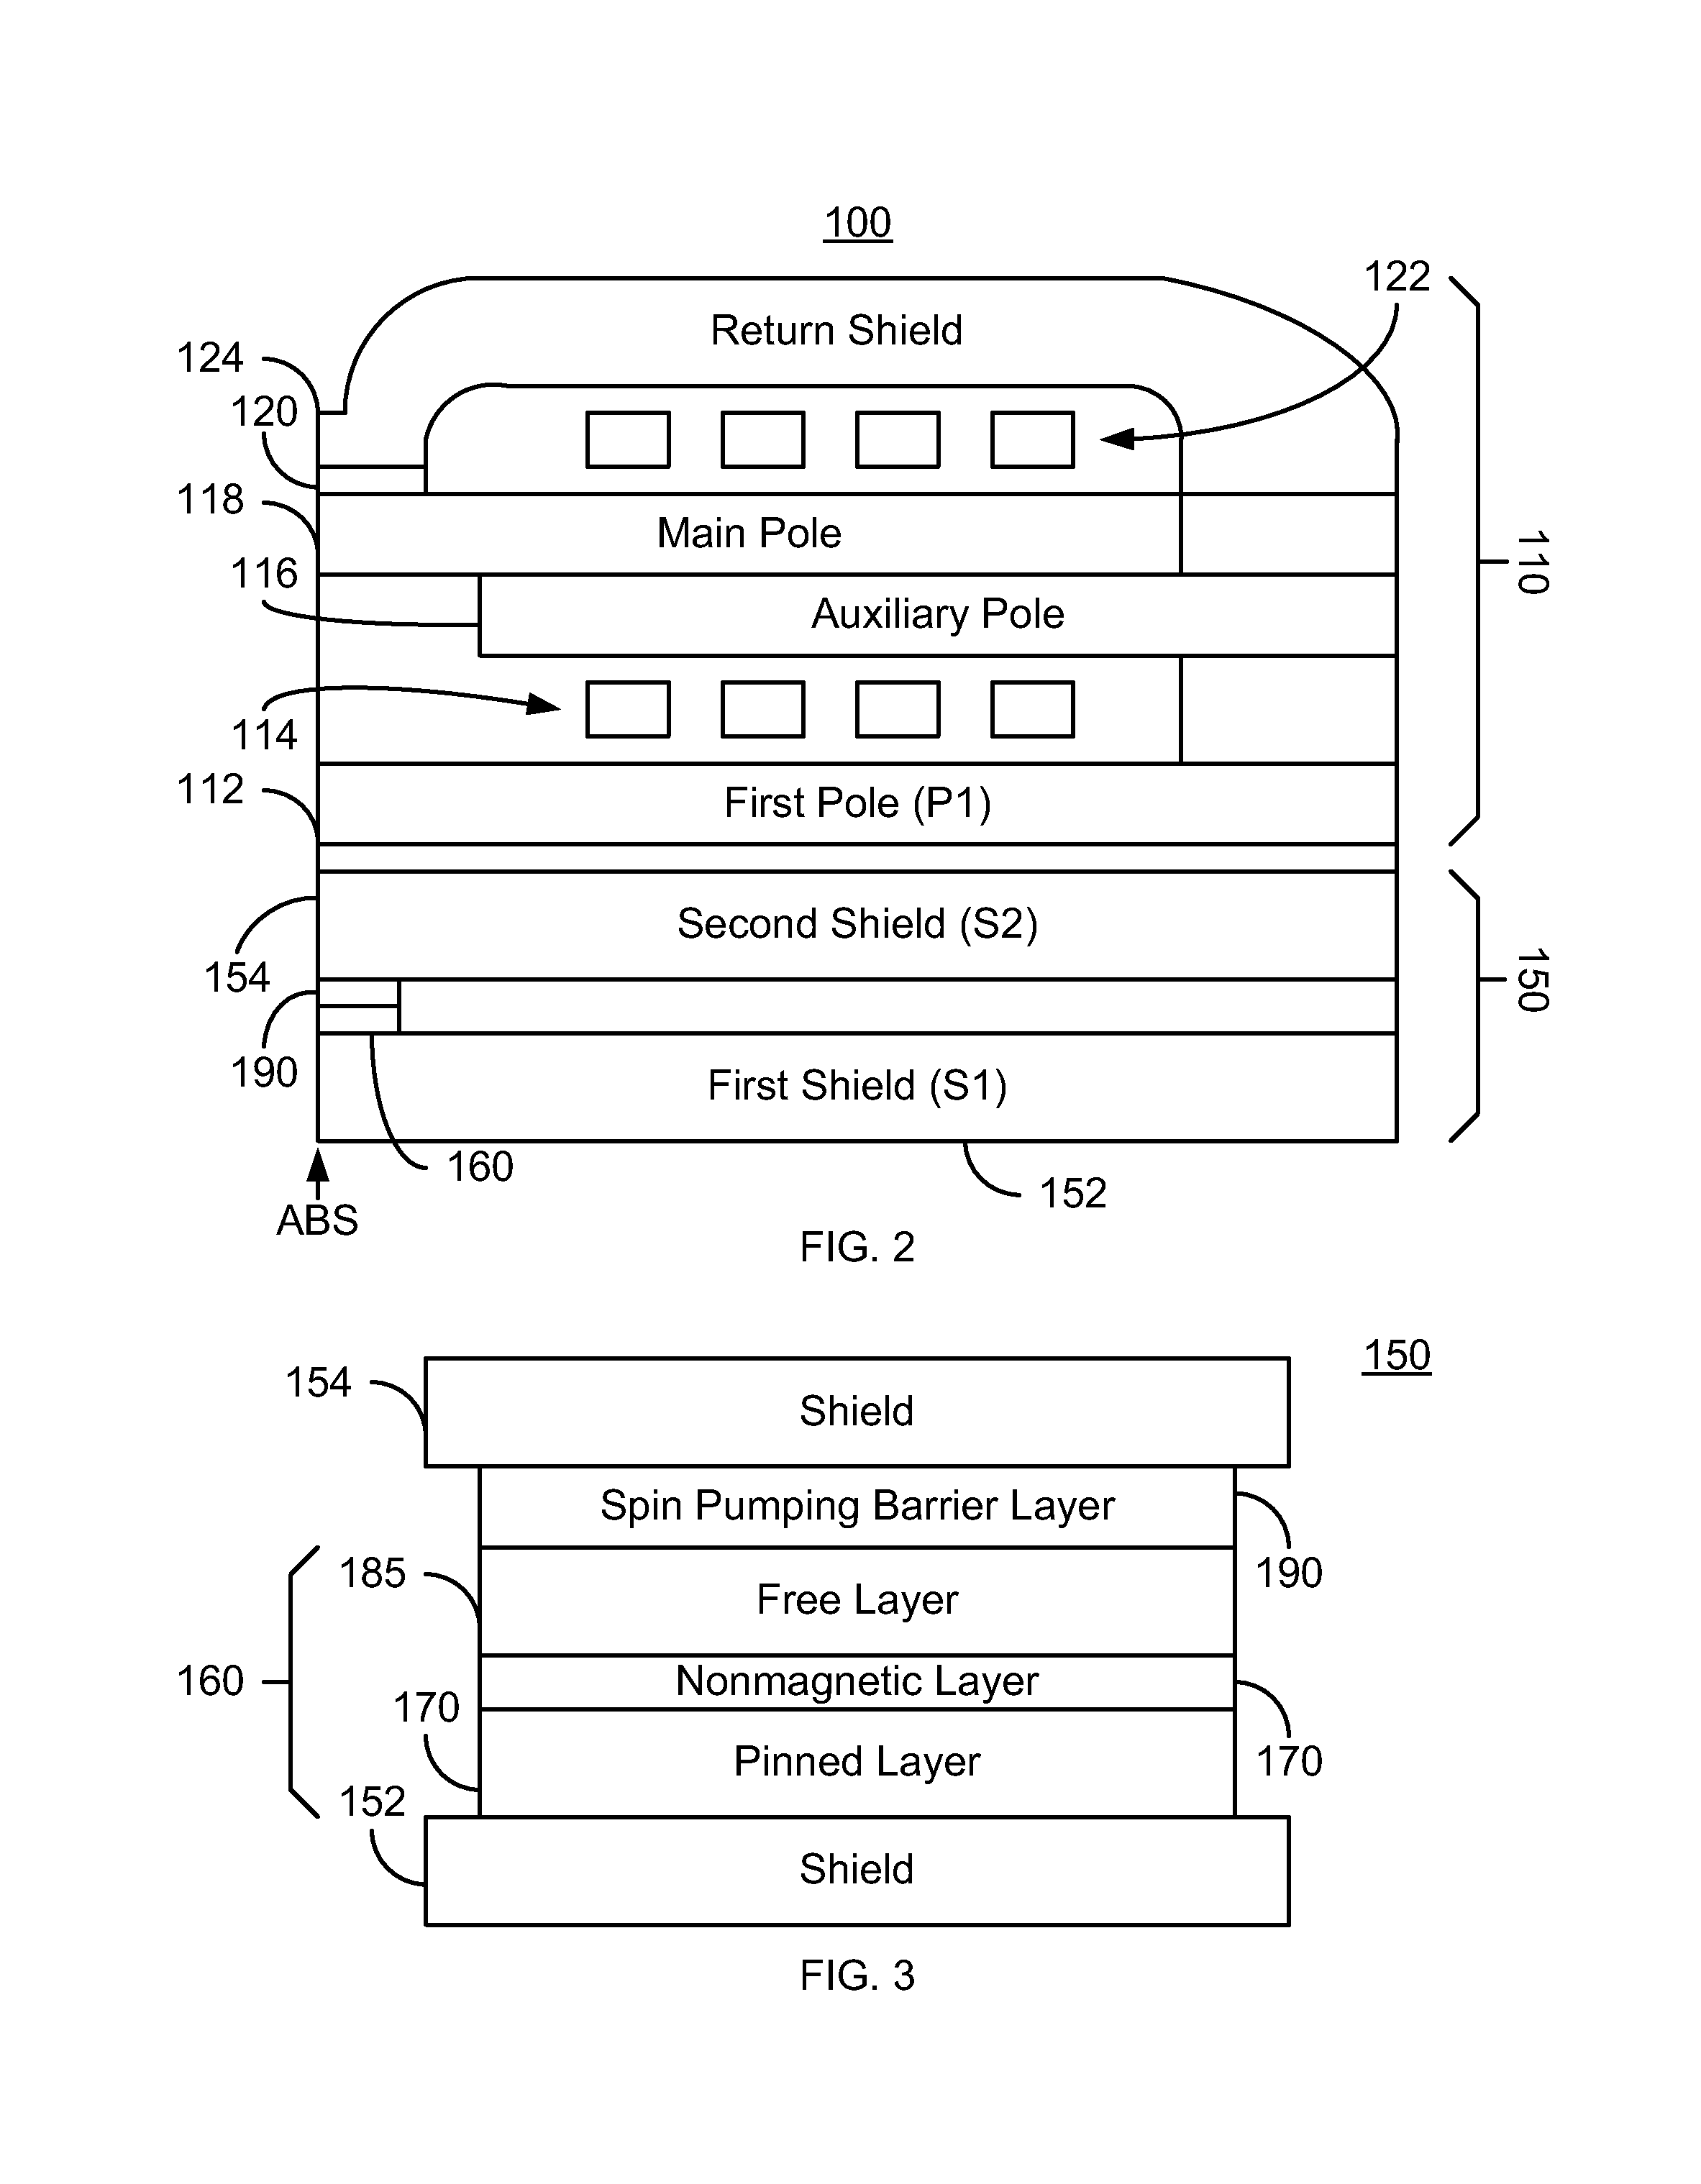 Method and system for providing a magnetic read transducer having an improved signal to noise ratio